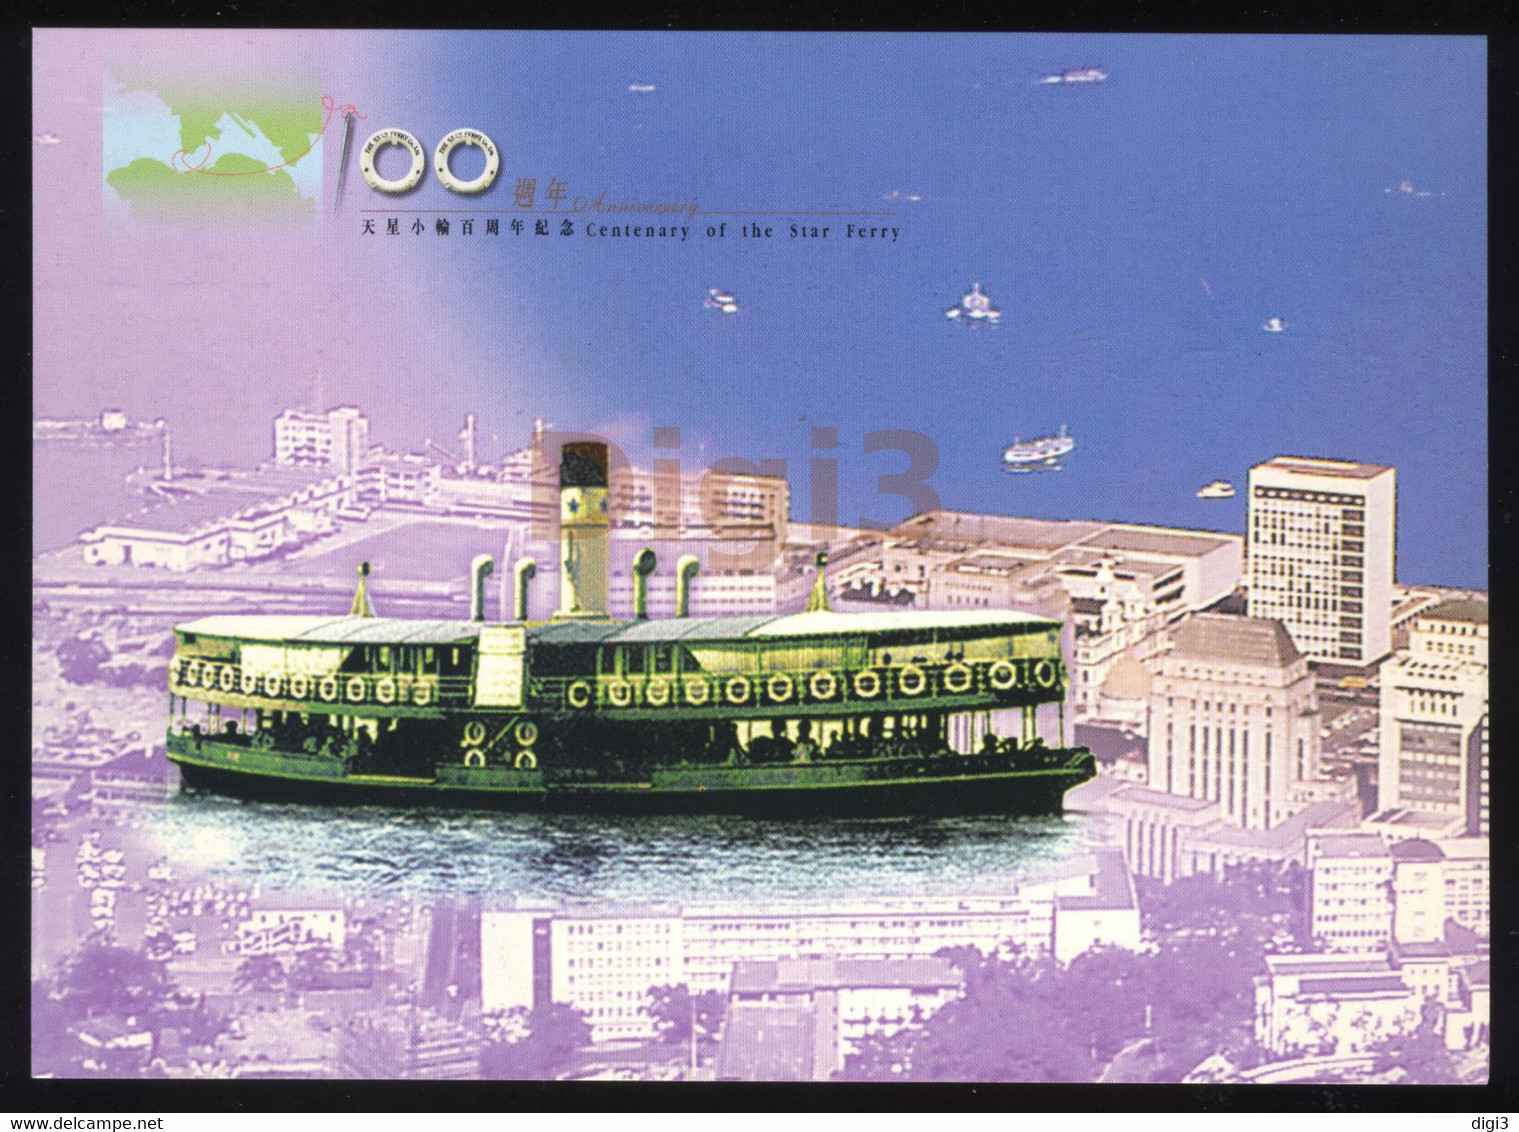 Hong Kong, Postcard, Centenary Of The Star Ferry, Postage Paid, Unused - Postal Stationery